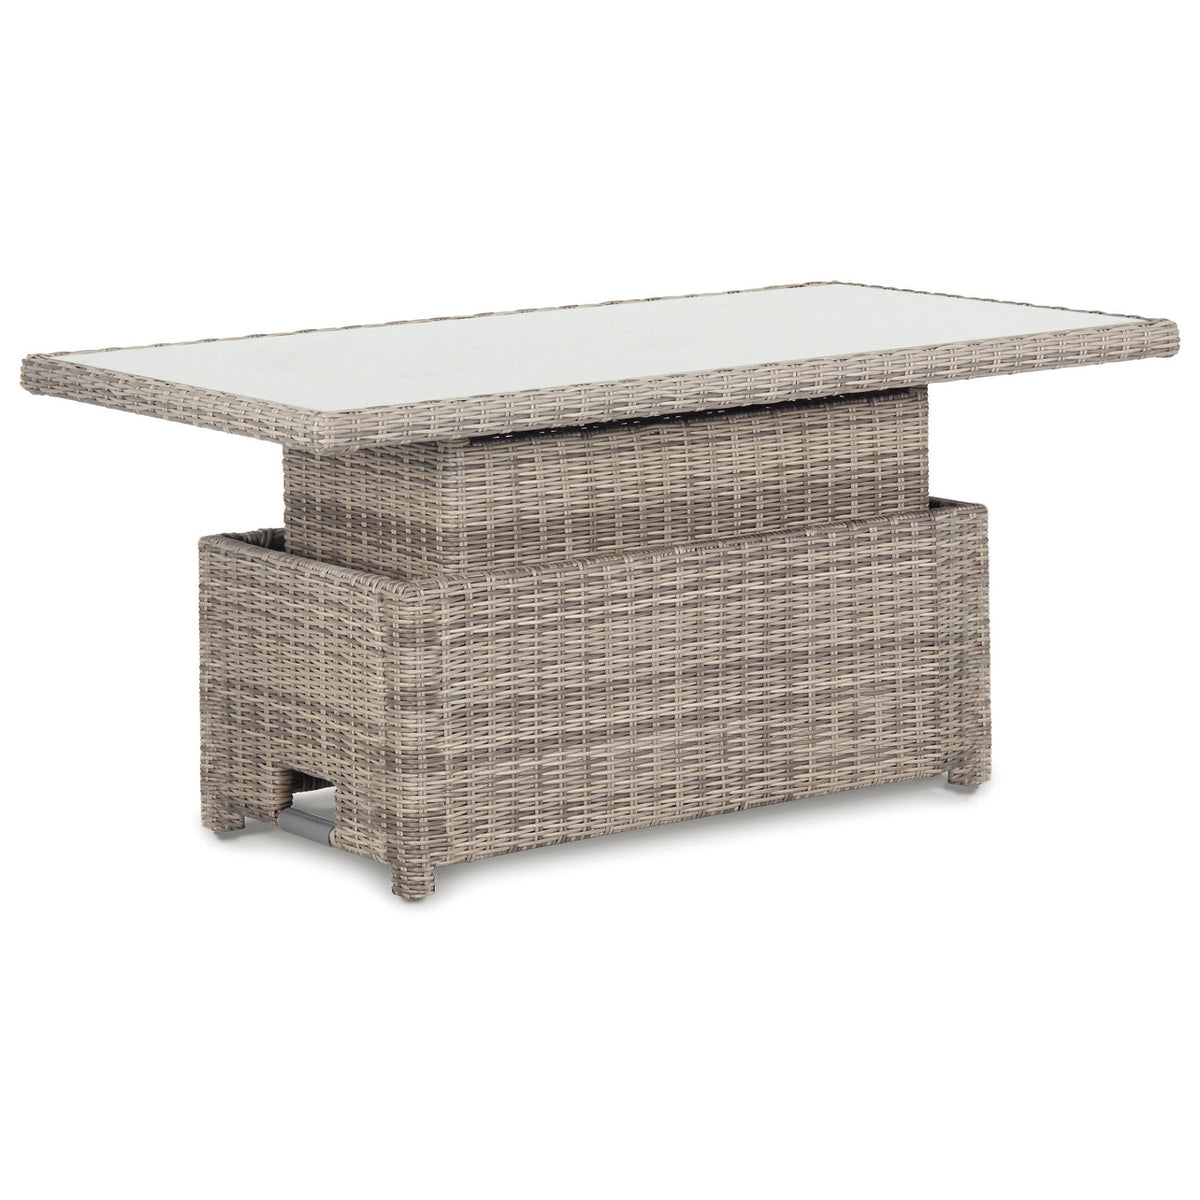 Kettler Palma Signature Oyster Wicker High Low Adjustable Glass Top Table